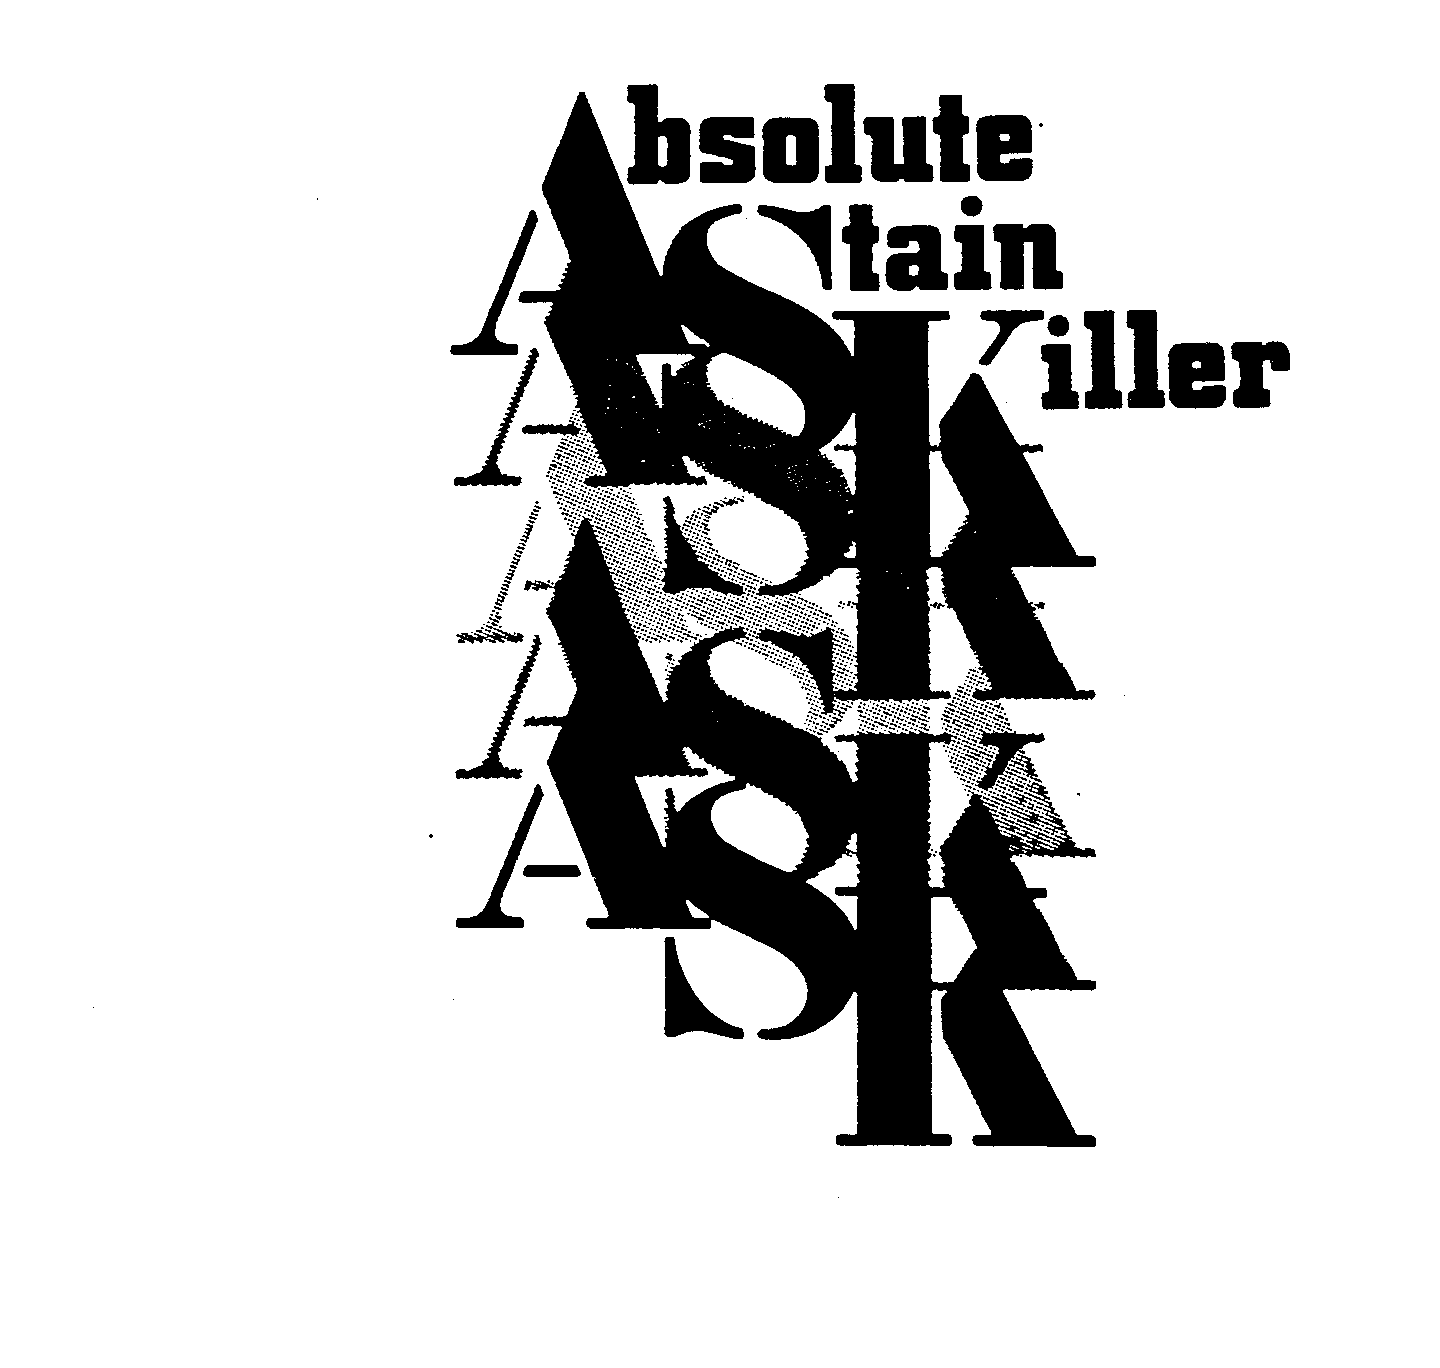  ASK ABSOLUTE STAIN KILLER